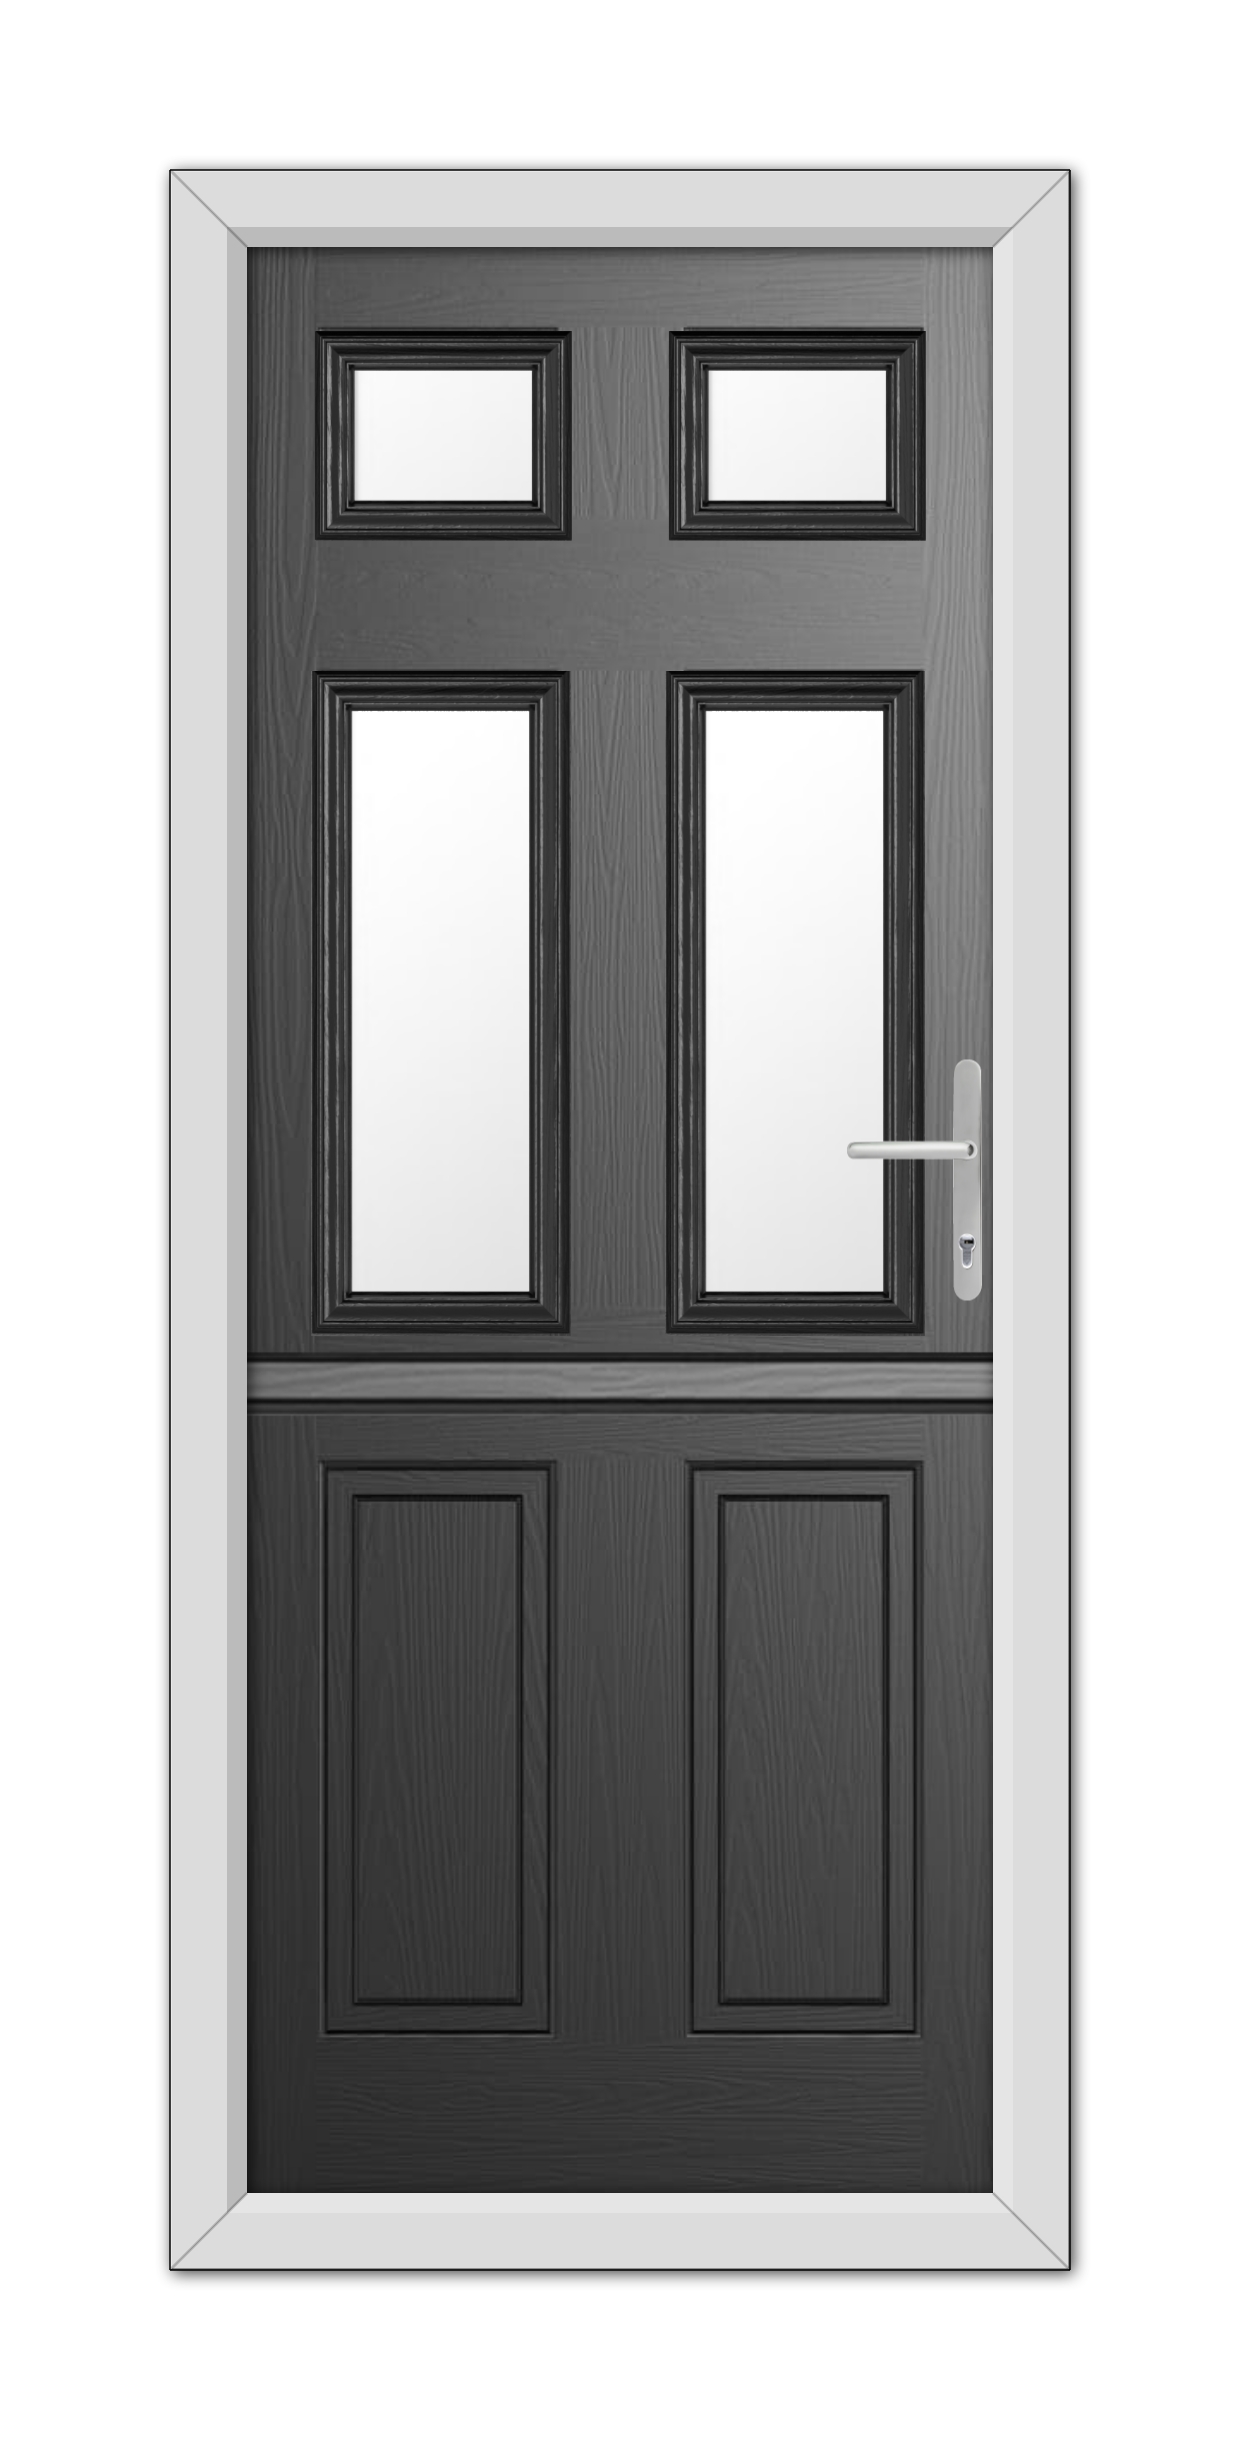 A modern Black Middleton Glazed 4 Stable Composite Door 48mm Timber Core with three rectangular windows, featuring a metal handle, framed within a white door frame.